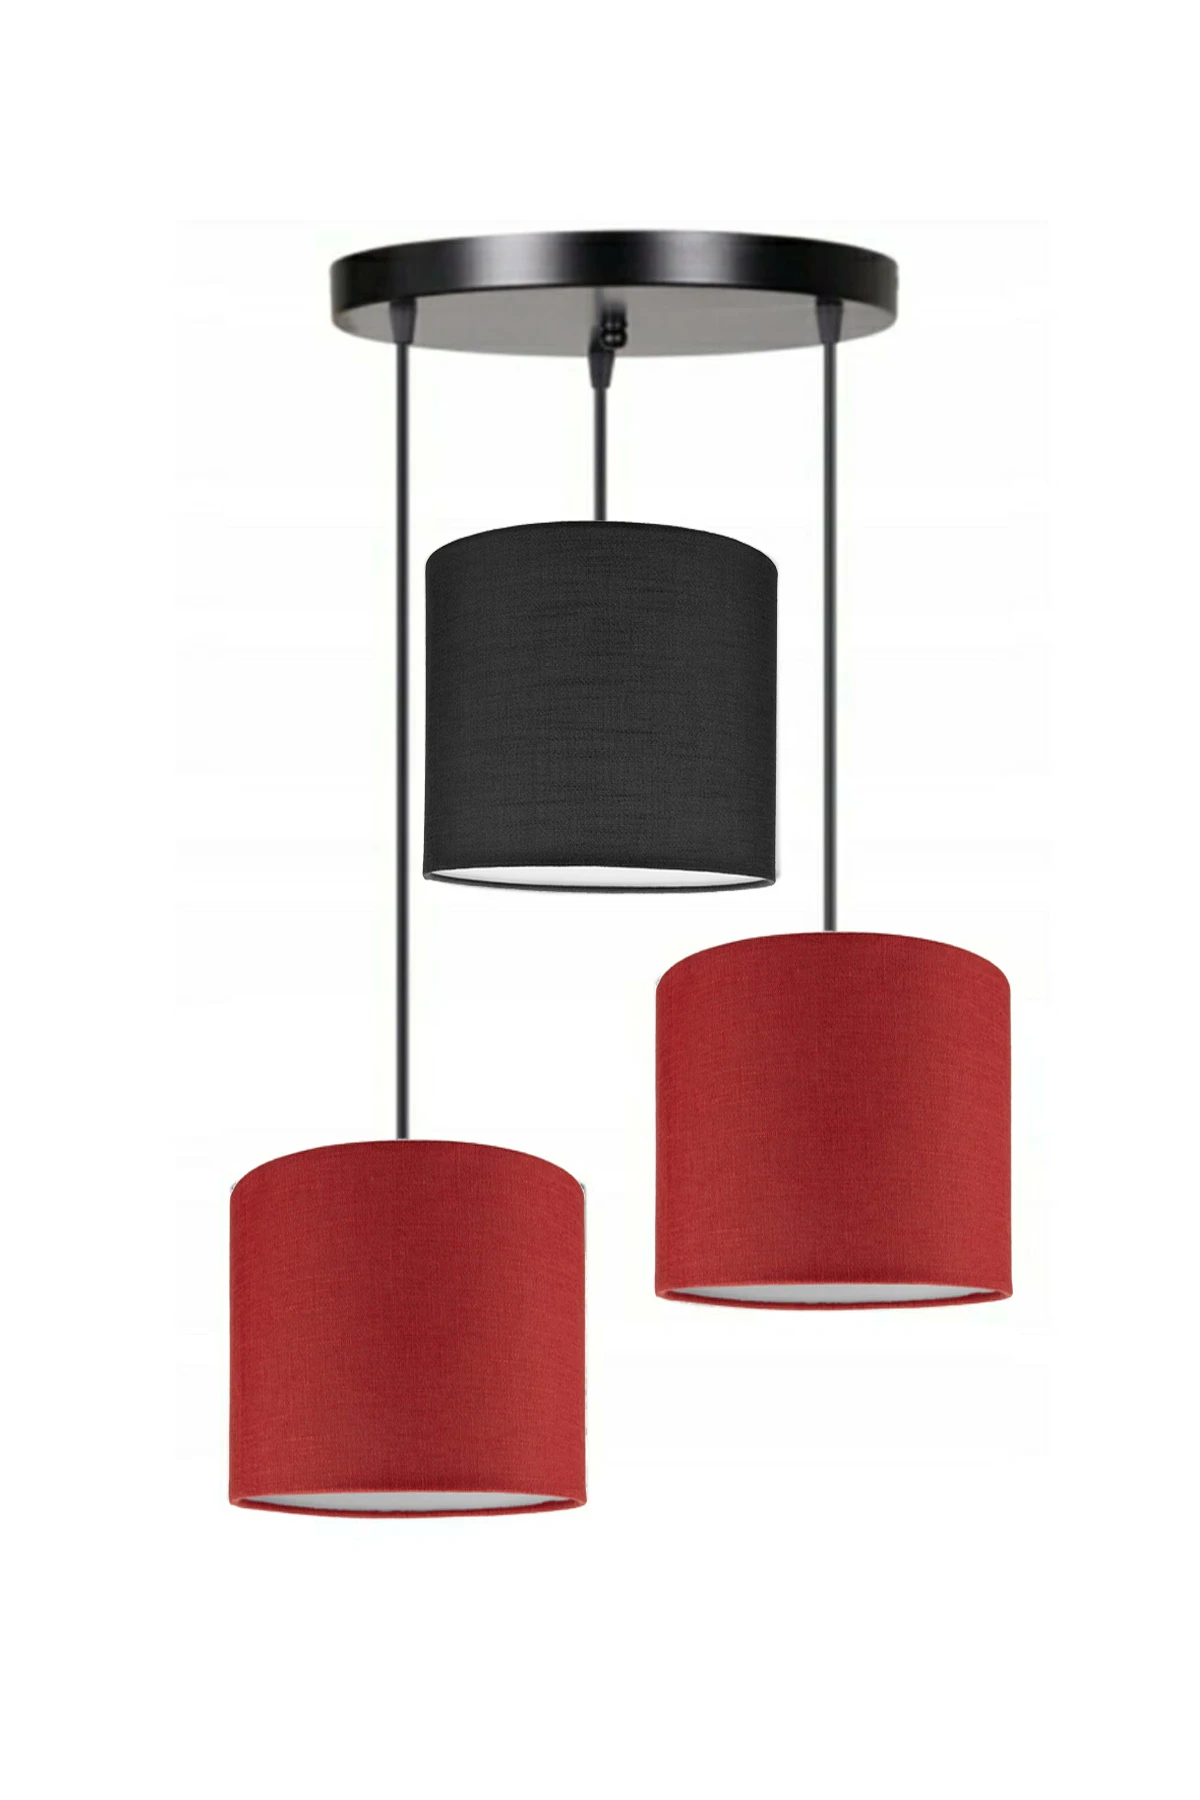 3 Heads 2 Red 1 Black Cylinder Fabric Lampshade Pendant Lamp Chandelier Modern Decorative Design For Home Hotel Office Use